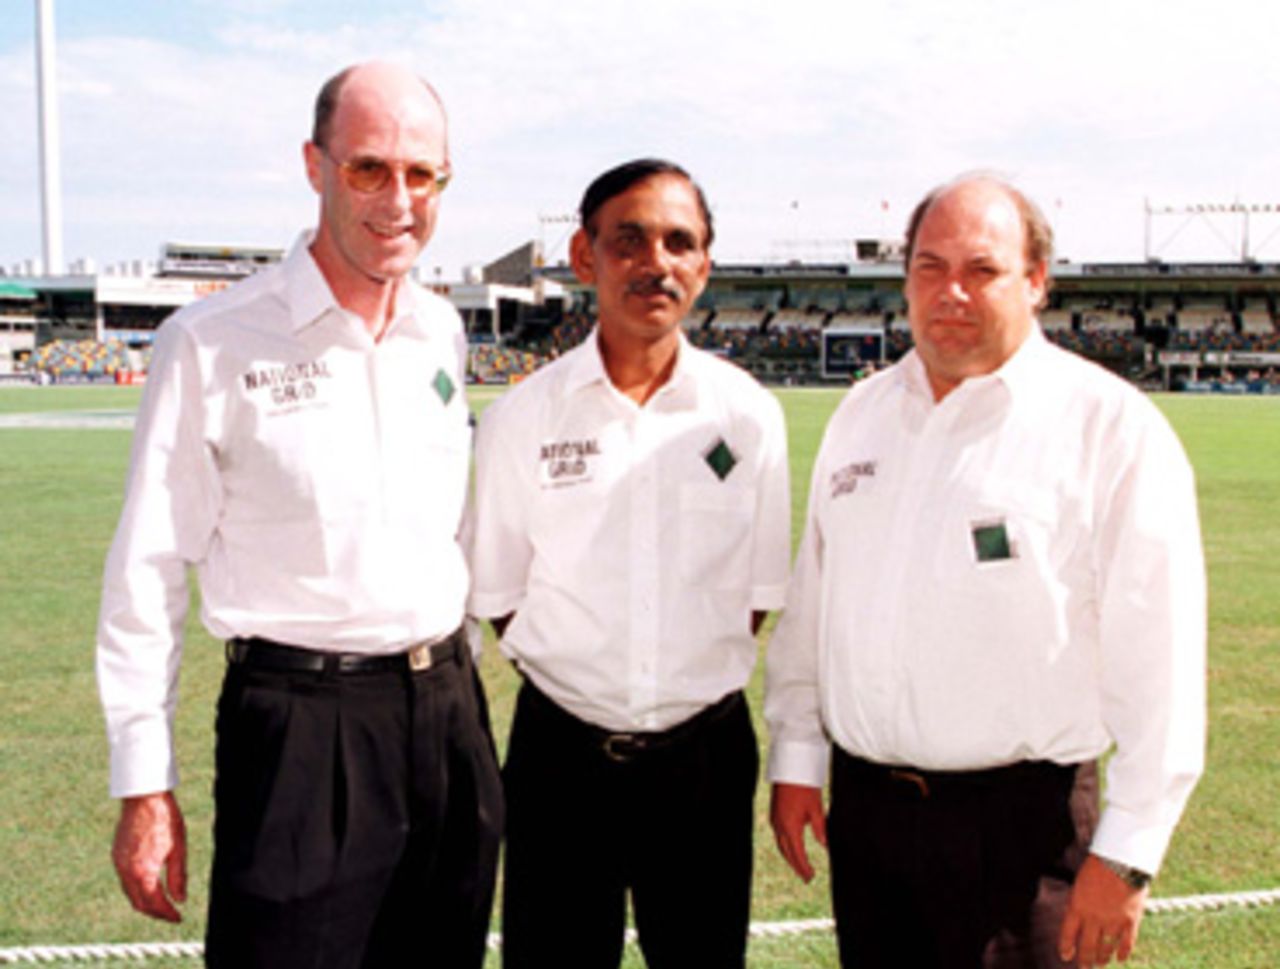 Steve Randell, V.K Ramaswamy and Peter Parker during the 4th day of the 1st Test between Australia and New Zealand at the Gabba, 7 - 11 Nov 1997